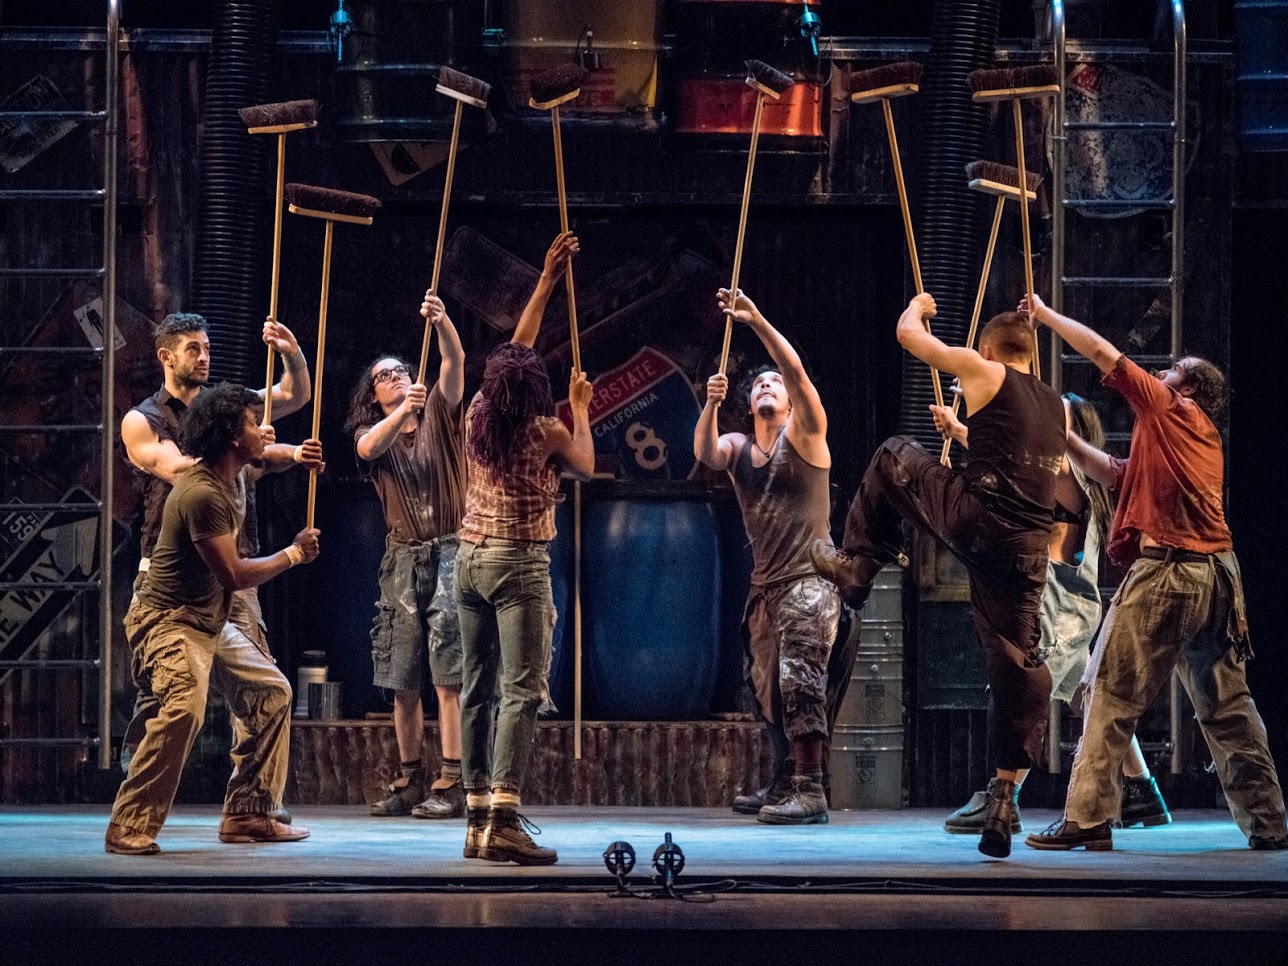 STOMP RETURNS TO THE BROADWAY PLAYHOUSE DEC. 5 - 30 2 Broadway In Chicago is pleased to announce that STOMP, the international percussion sensation, returns to Chicago for the holidays by popular demand to play the Broadway Playhouse at Water Tower Place (175 E Chestnut) for a limited engagement December 5 – 30, 2018.  From its beginnings as a street performance in the UK, STOMP has grown into an international sensation over the past 20 years, having performed in more than 50 countries.  Individual tickets go on-sale to the public on September 28, 2018.